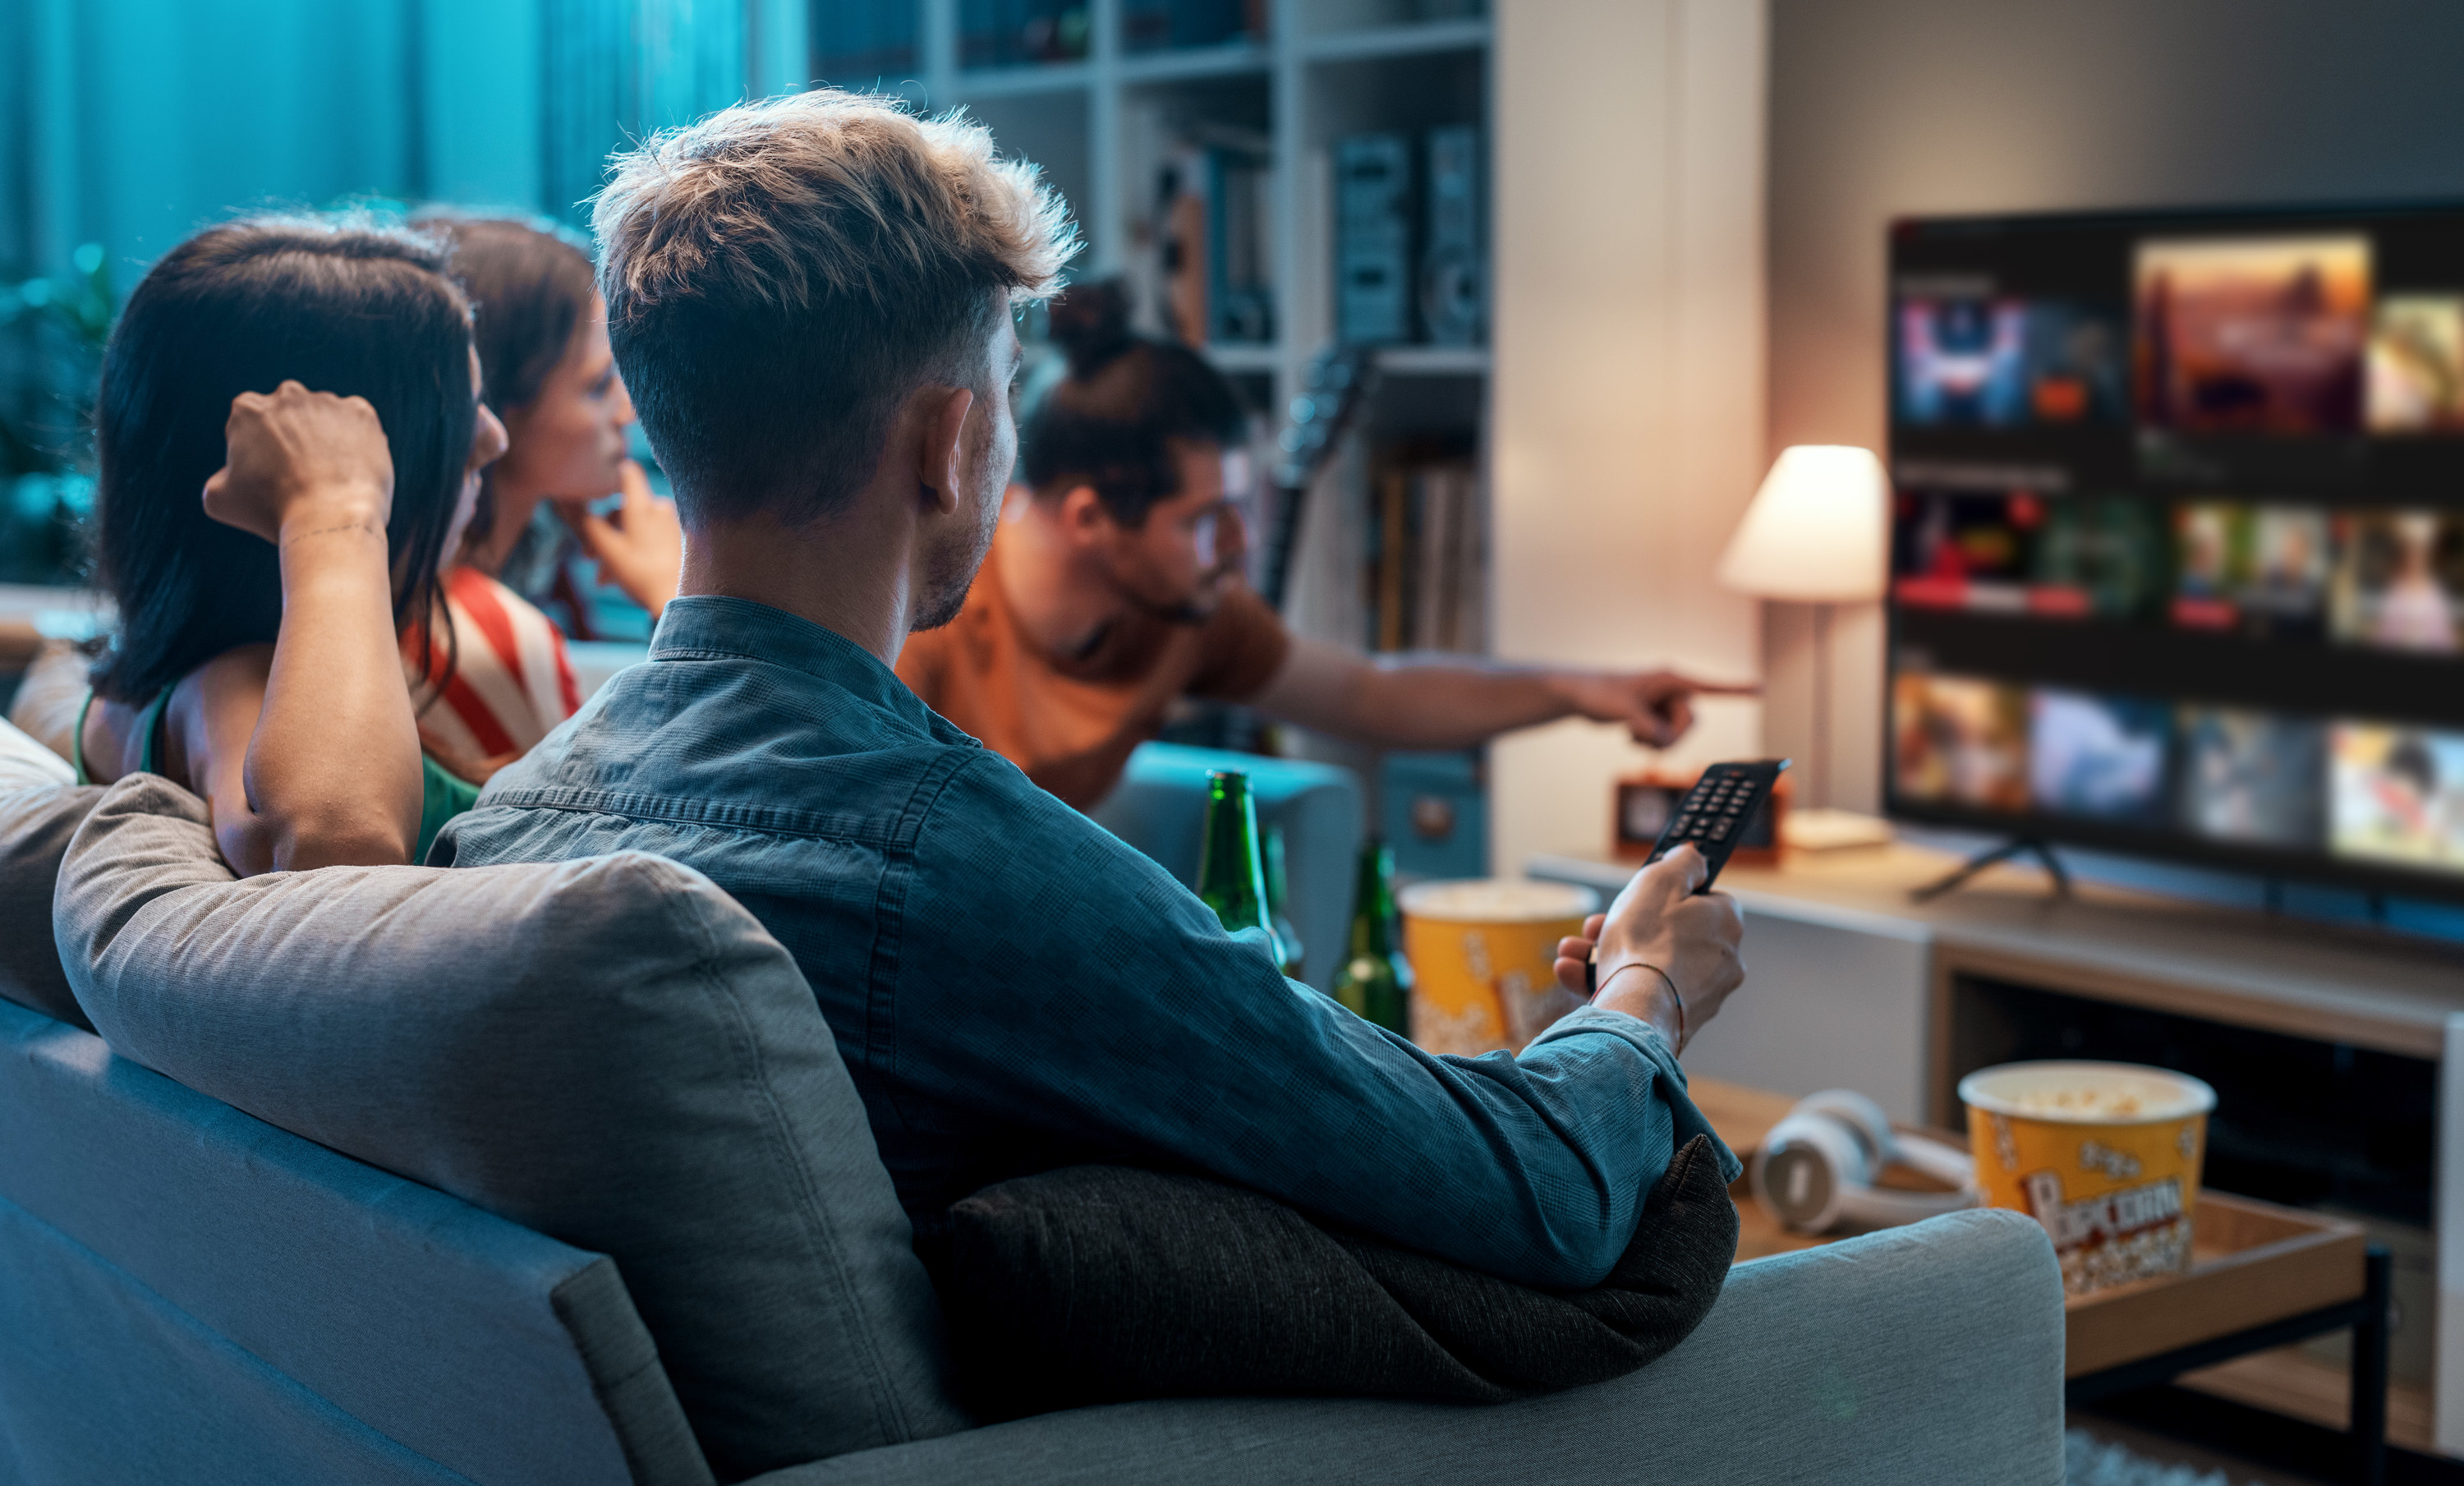 group of people watching tv together